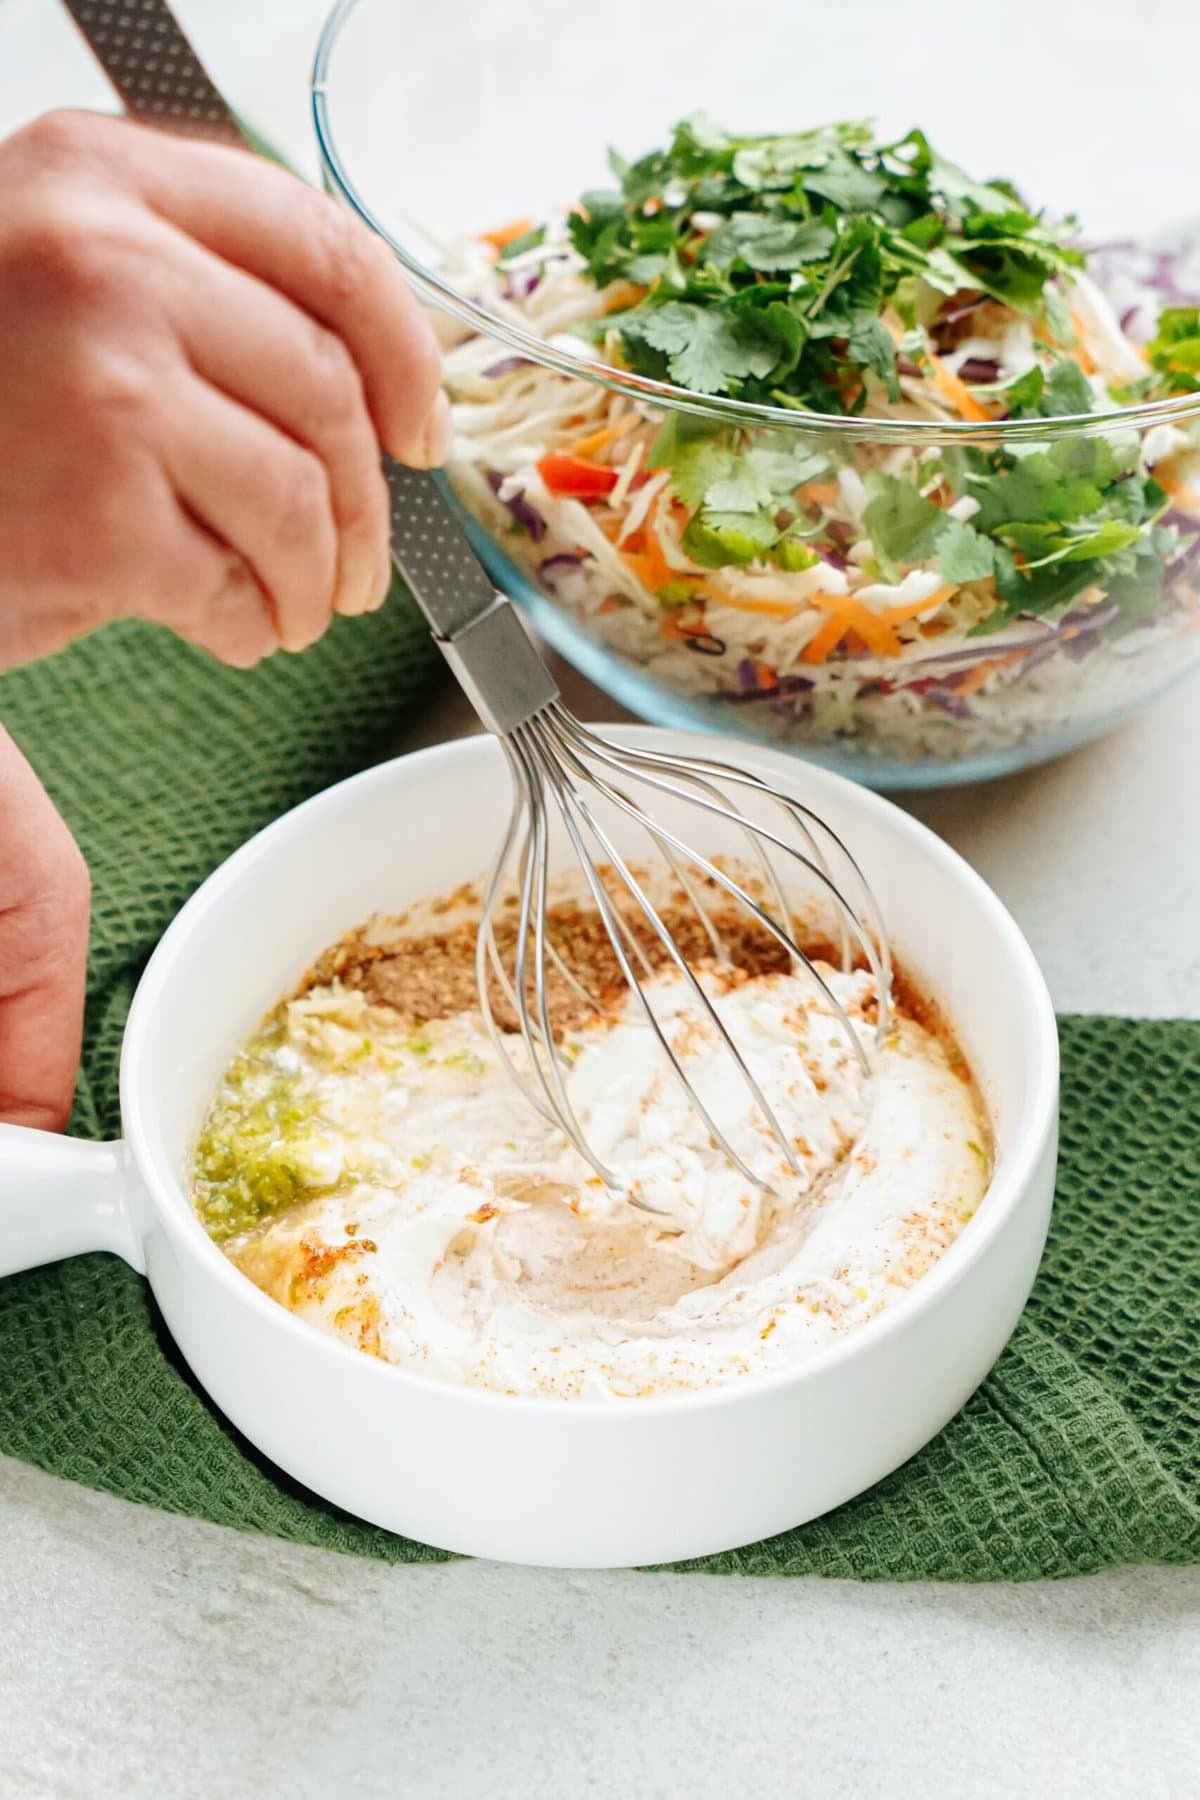 Whisking a dressing in a white cup with a green napkin underneath, with colorful fish tacos in the background.